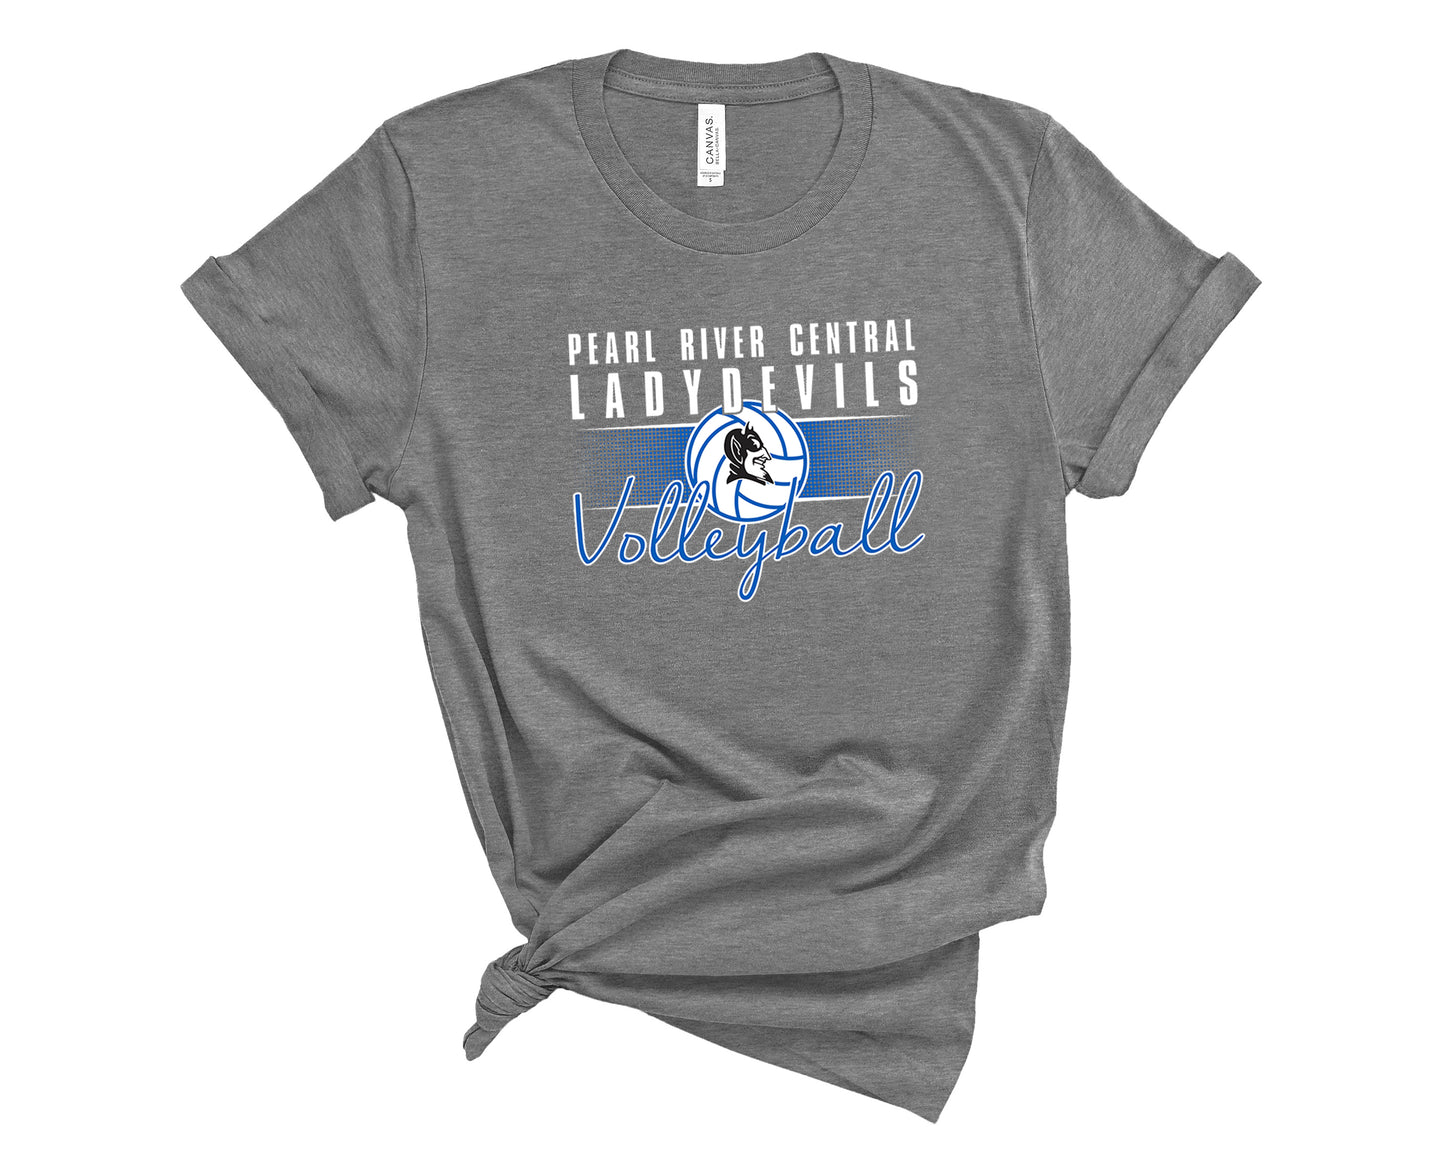 B+C Lady Devils Volleyball Tee